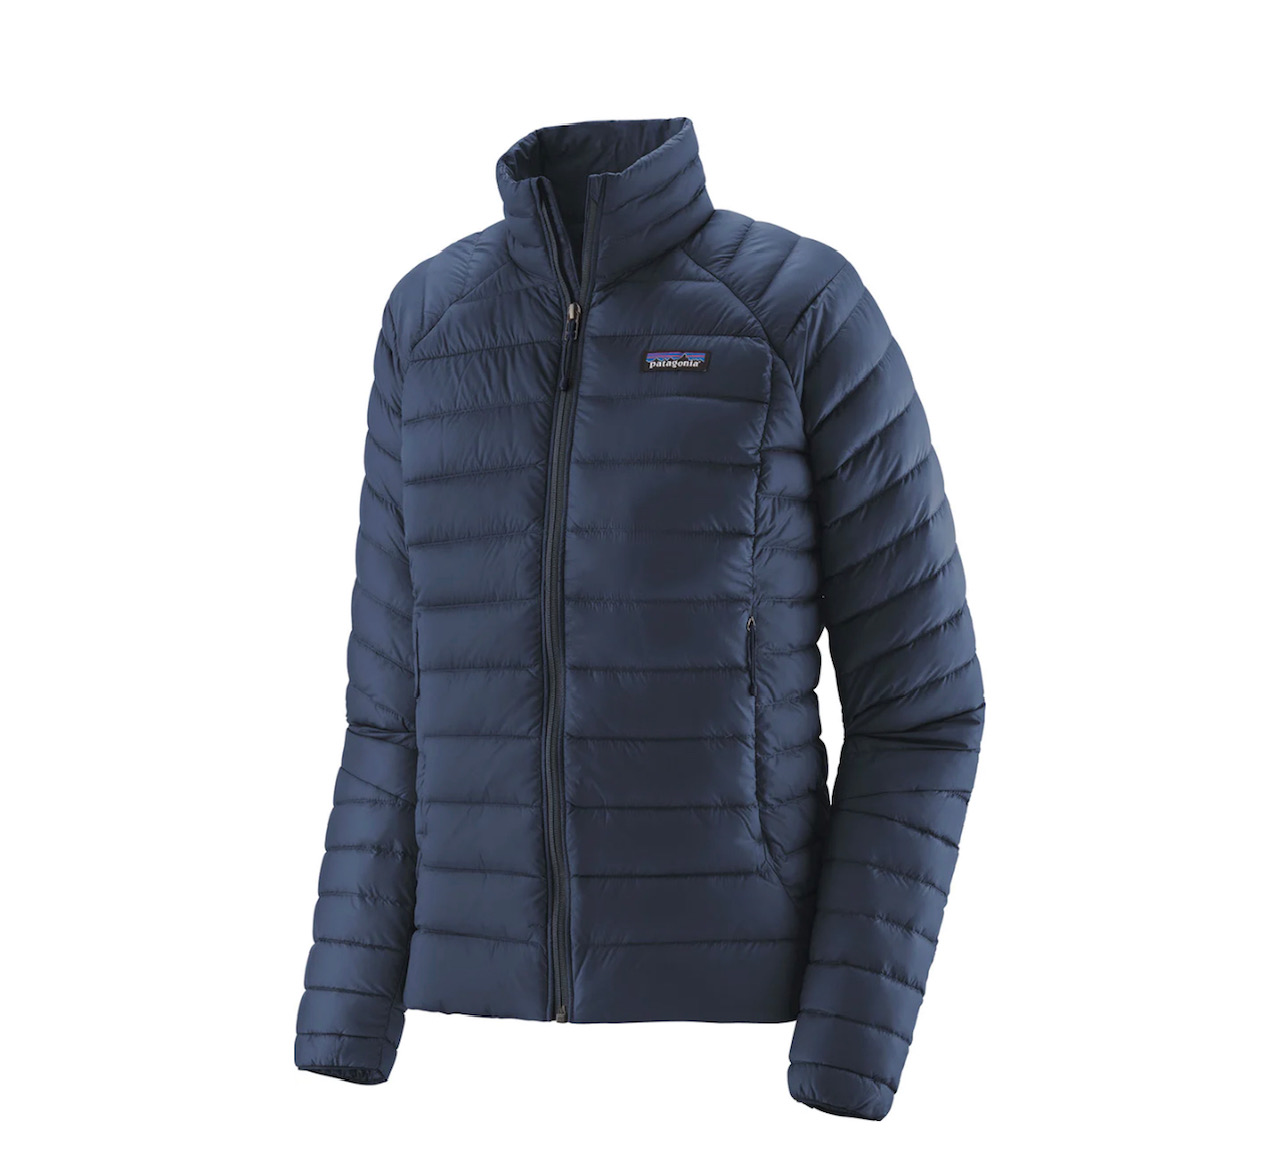 Patagonia W's Down Sweater Jacket - Classic Navy - Small